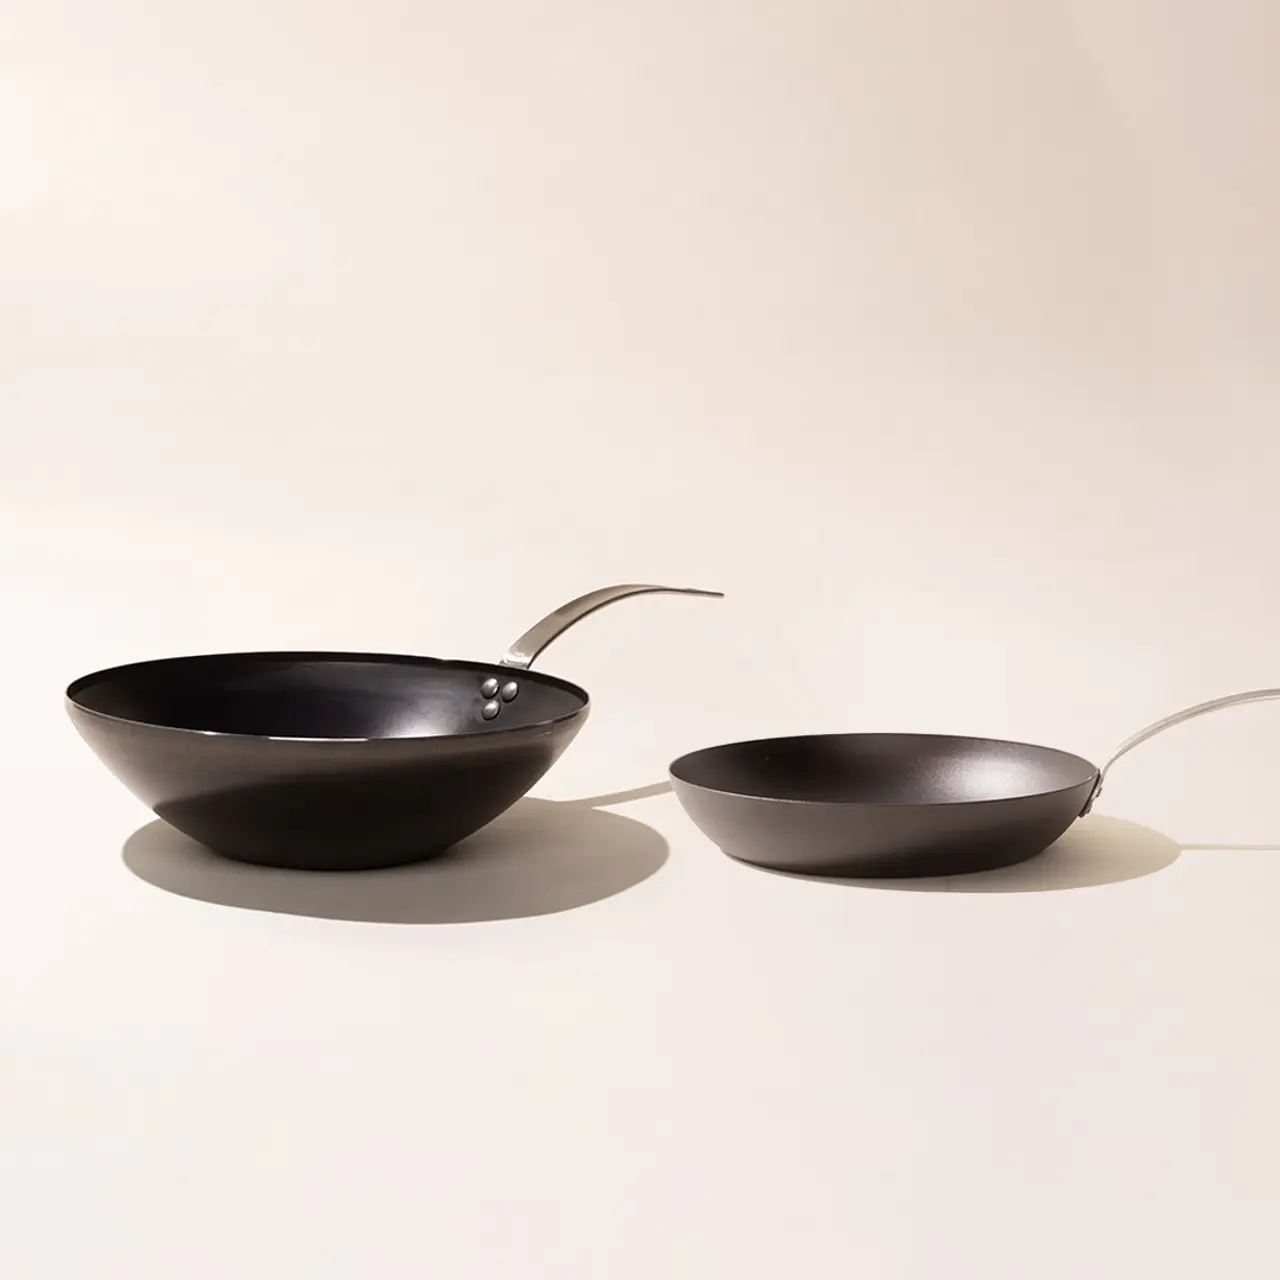 Two black frying pans with elongated, curved handles are positioned opposite each other, appearing to mimic a conversation or interaction, against a neutral background.